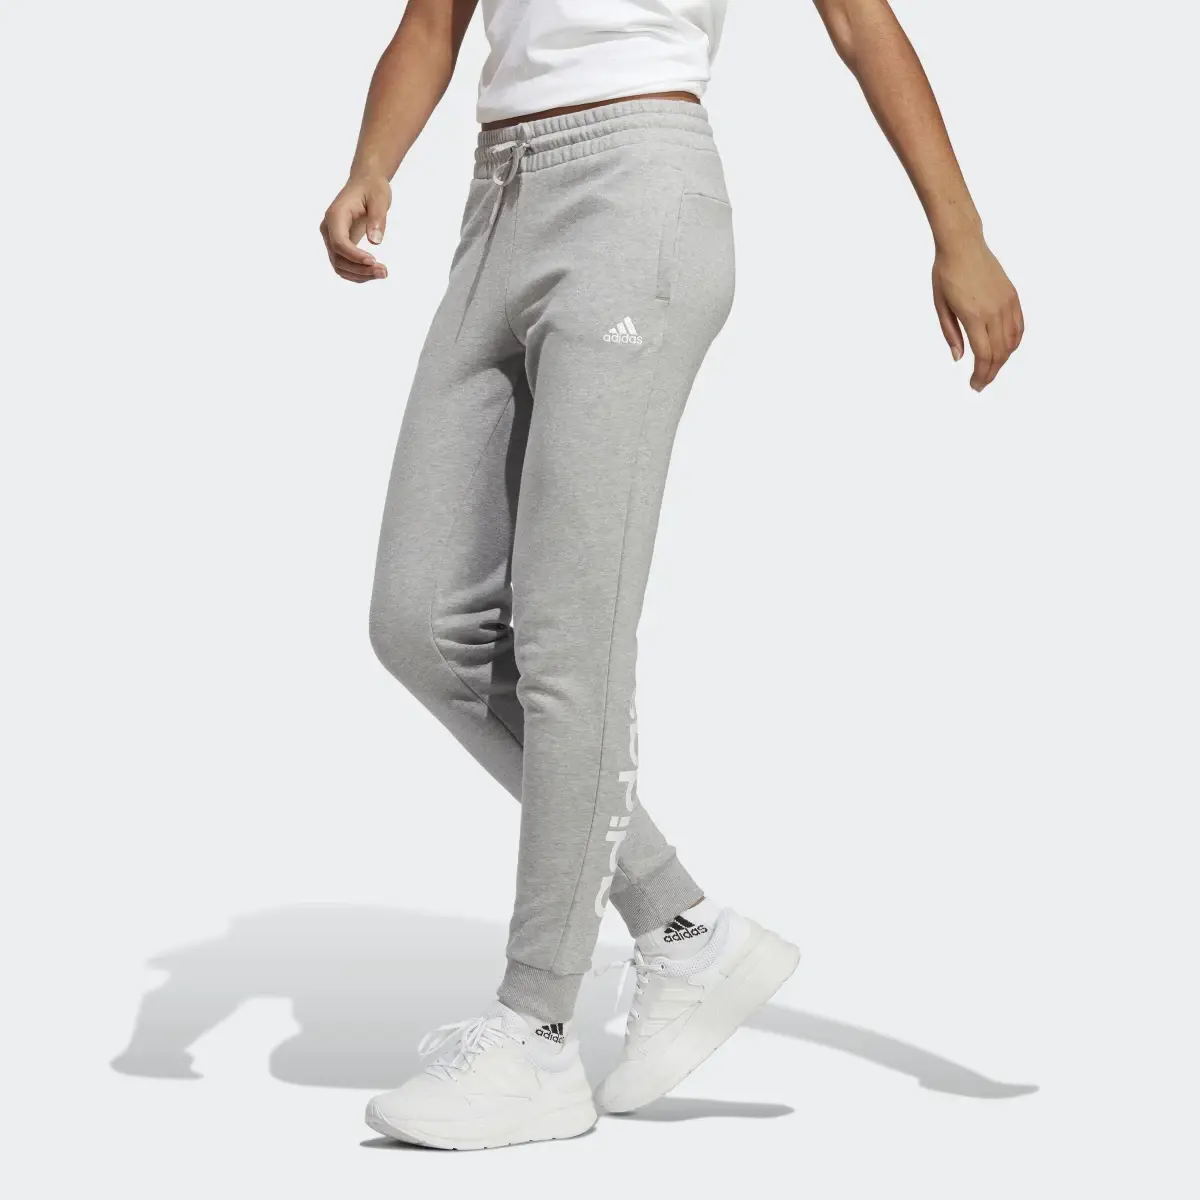 Adidas Essentials Linear French Terry Cuffed Pants. 1